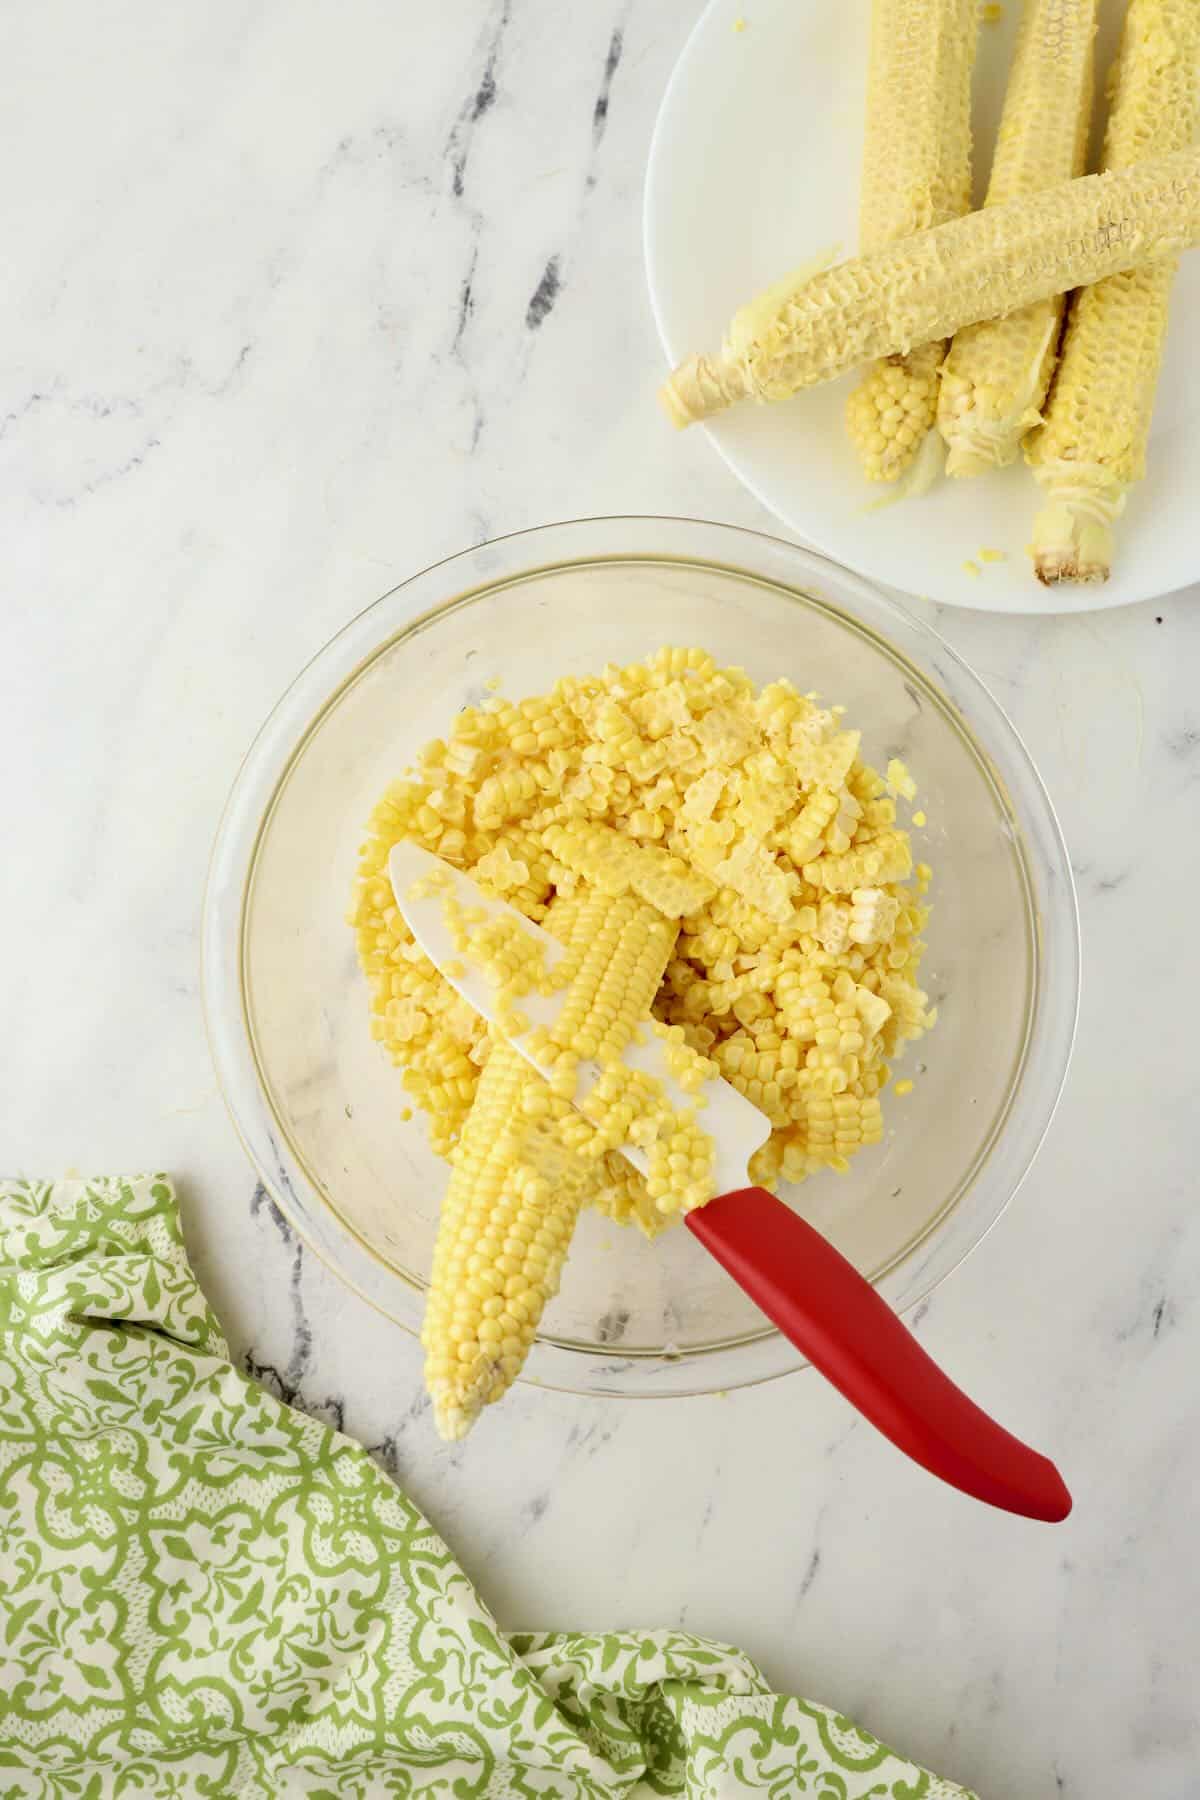 Cutting kernels off of a corn cob into a clear glass bowl using a knife.